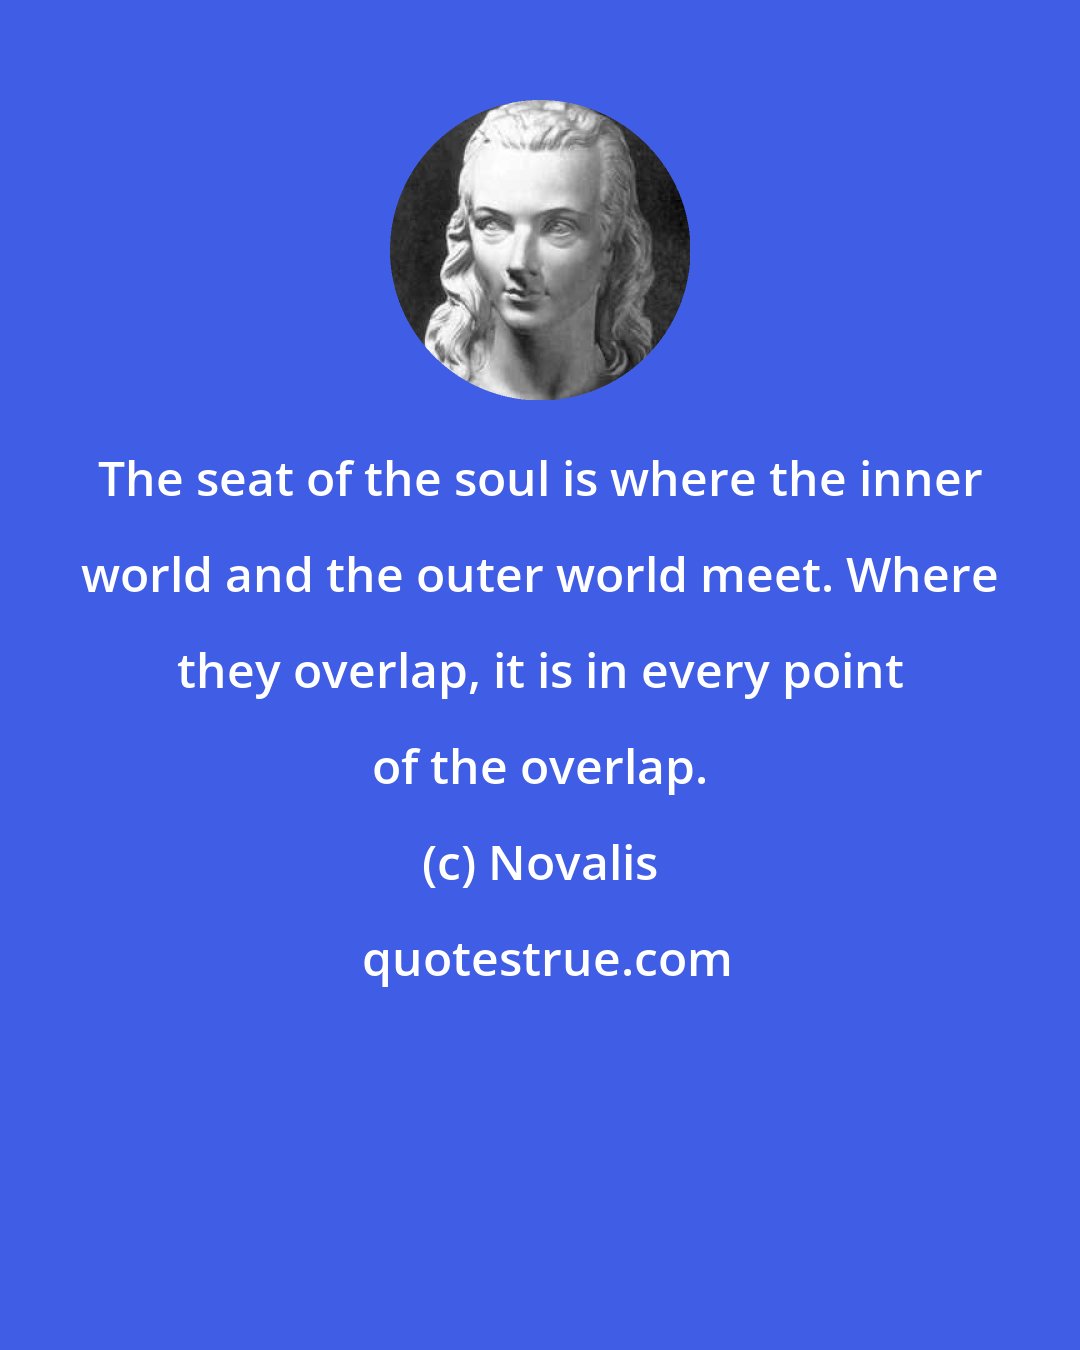 Novalis: The seat of the soul is where the inner world and the outer world meet. Where they overlap, it is in every point of the overlap.